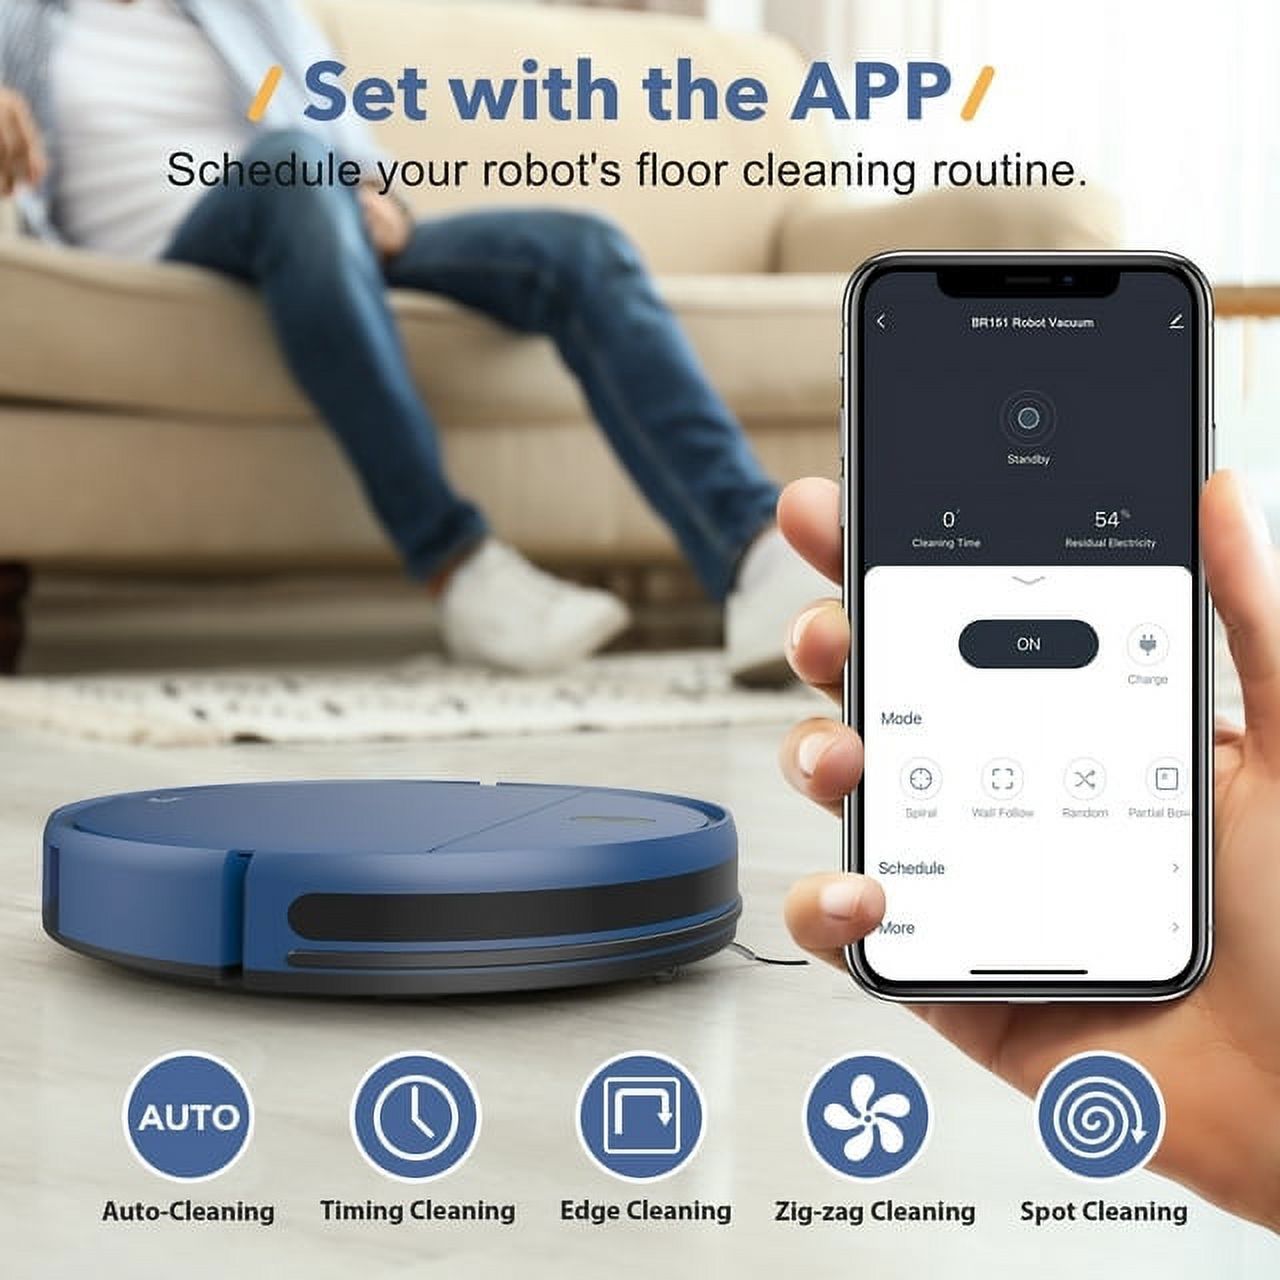 ONSON Robot Vacuum Cleaner, Robot Vacuum and Mop Combo with WIFI / Alexa for Pet Hair and Hard Floor - image 5 of 9